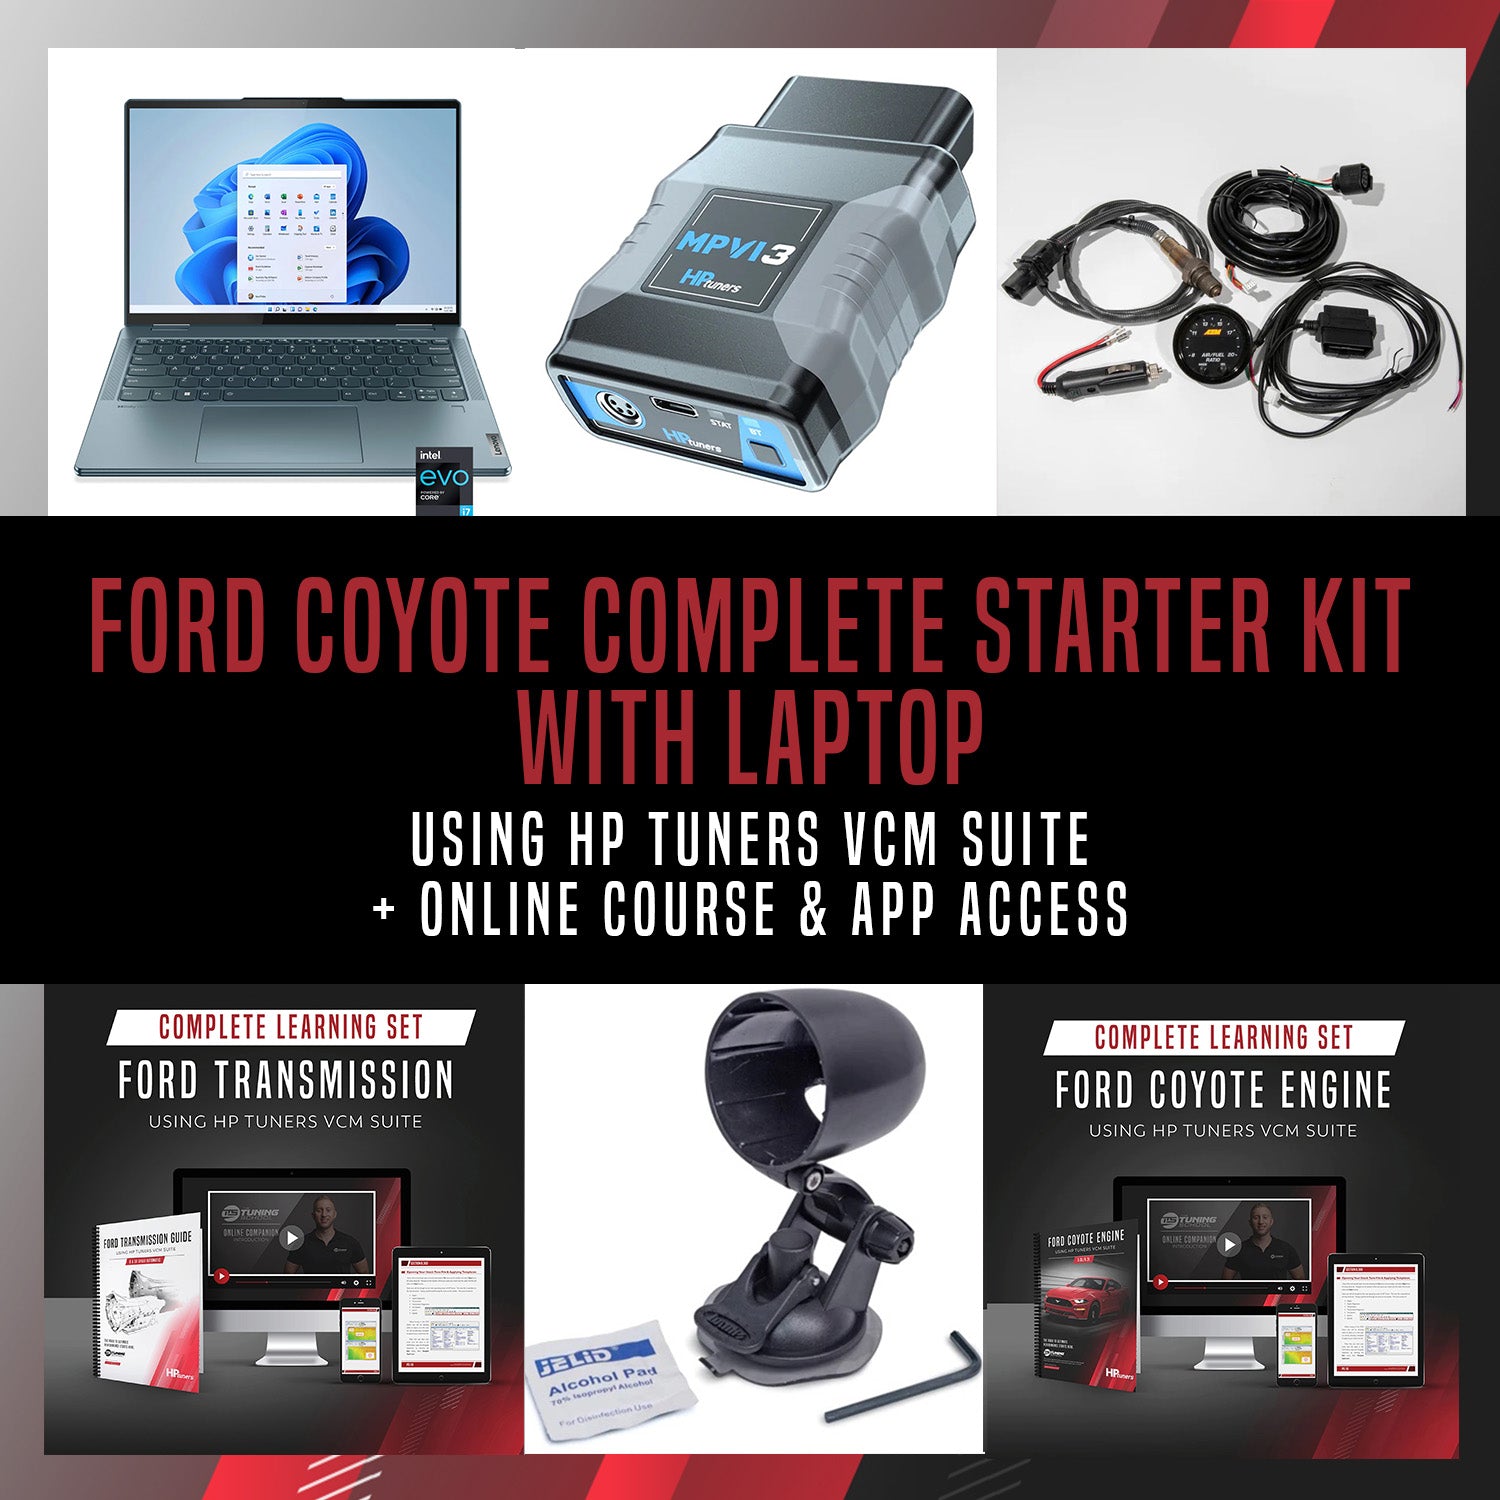 Ford Coyote Starter Kit with Laptop